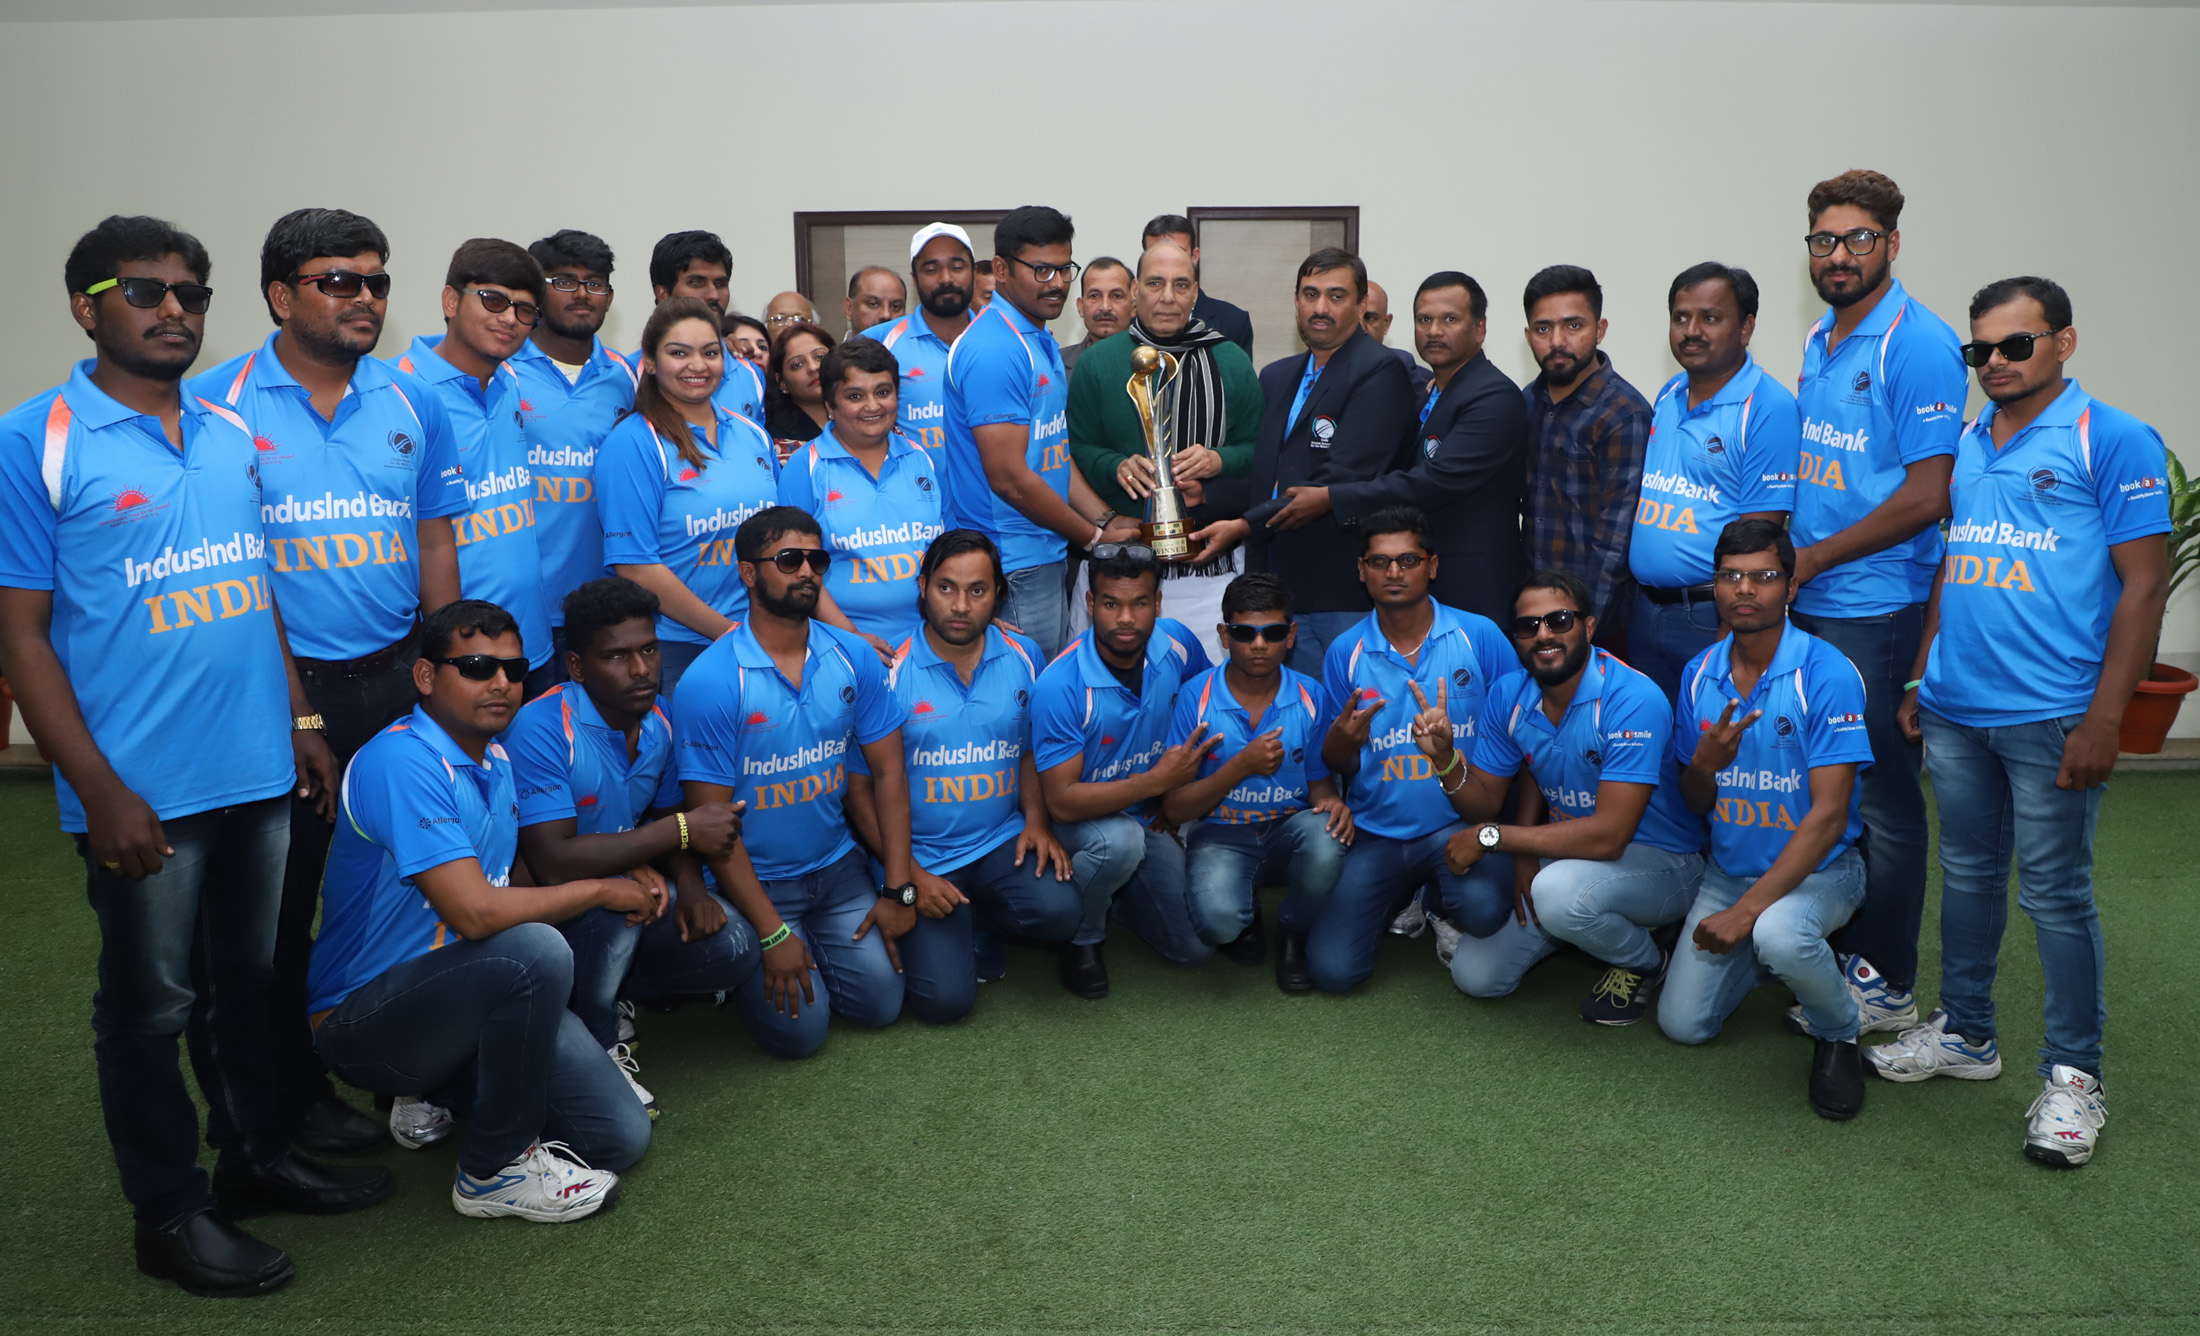 The India team which won the recent 2018 Blind Cricket World Cup in Sharjah, UAE, calling on the Union Home Minister, Shri Rajnath Singh, in New Delhi on January 23, 2018.